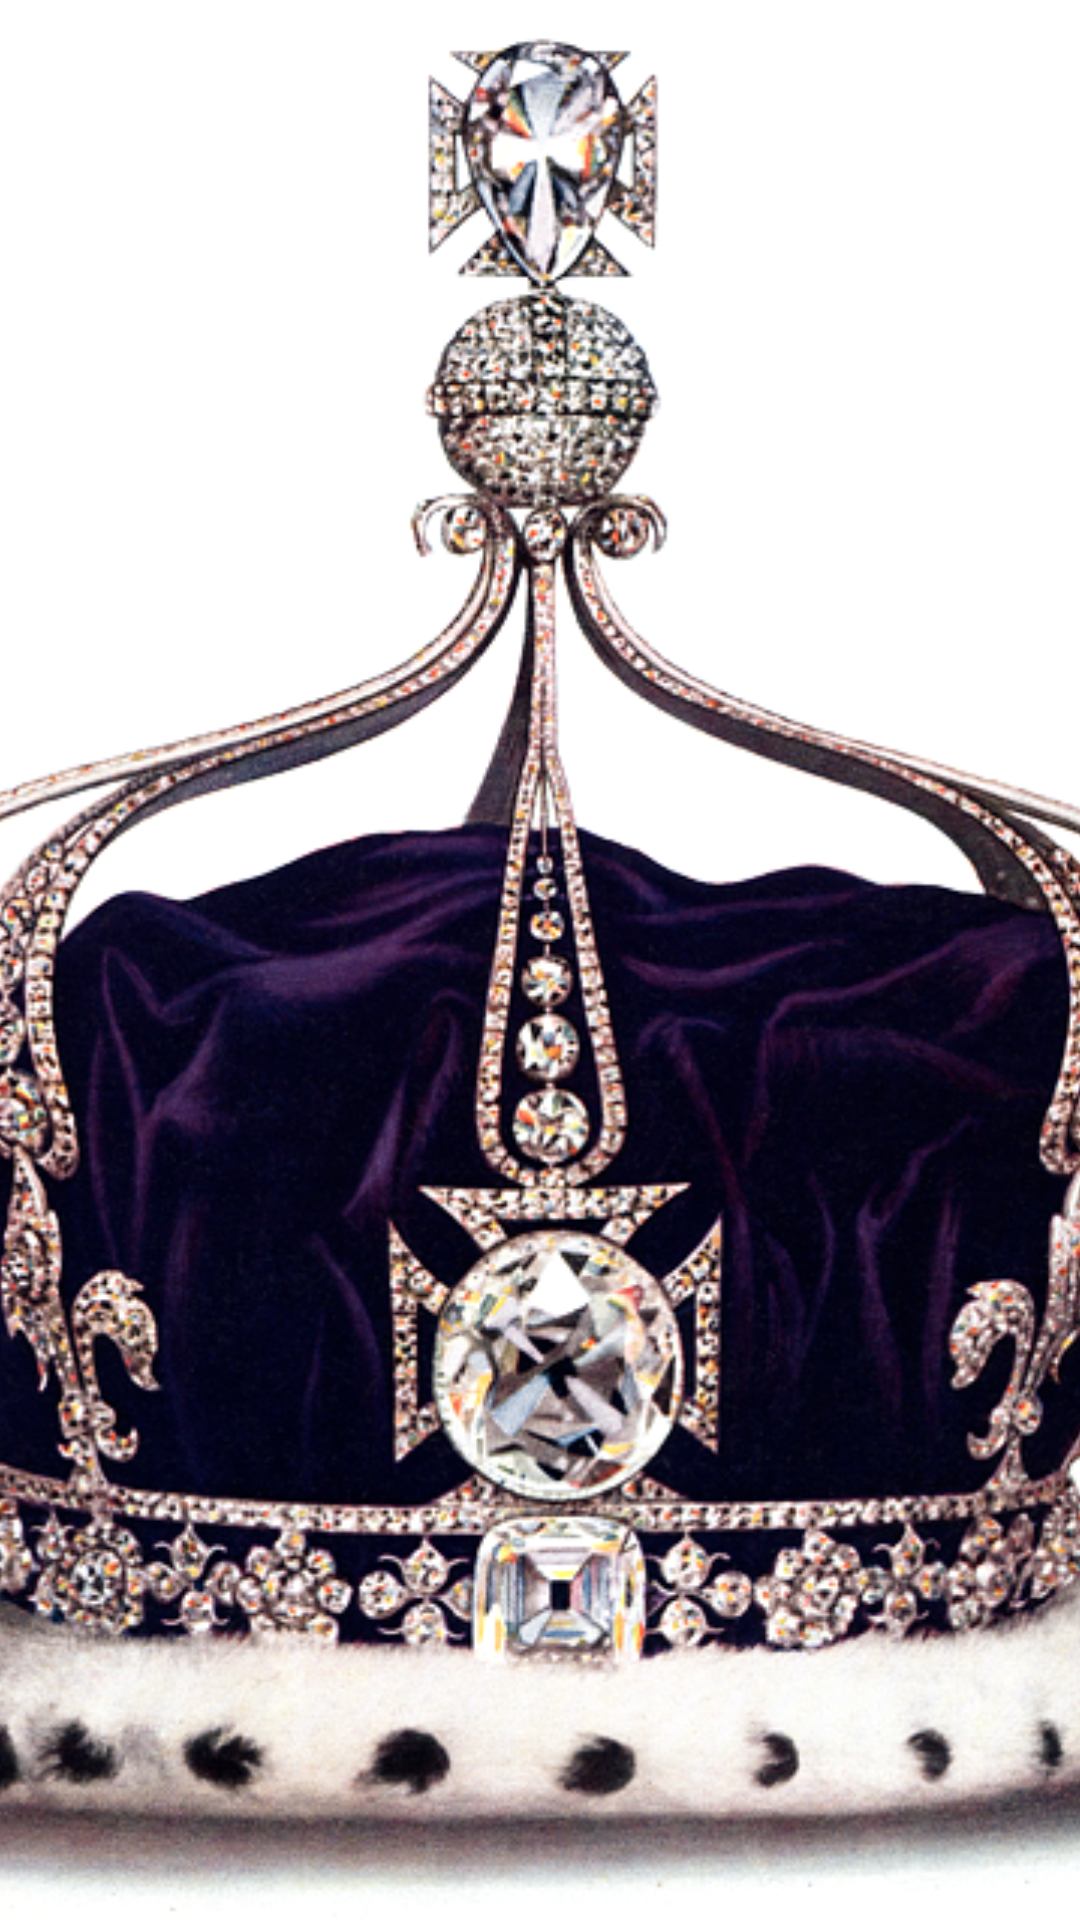 Kohinoor will be replaced by other diamonds in the revamped crown